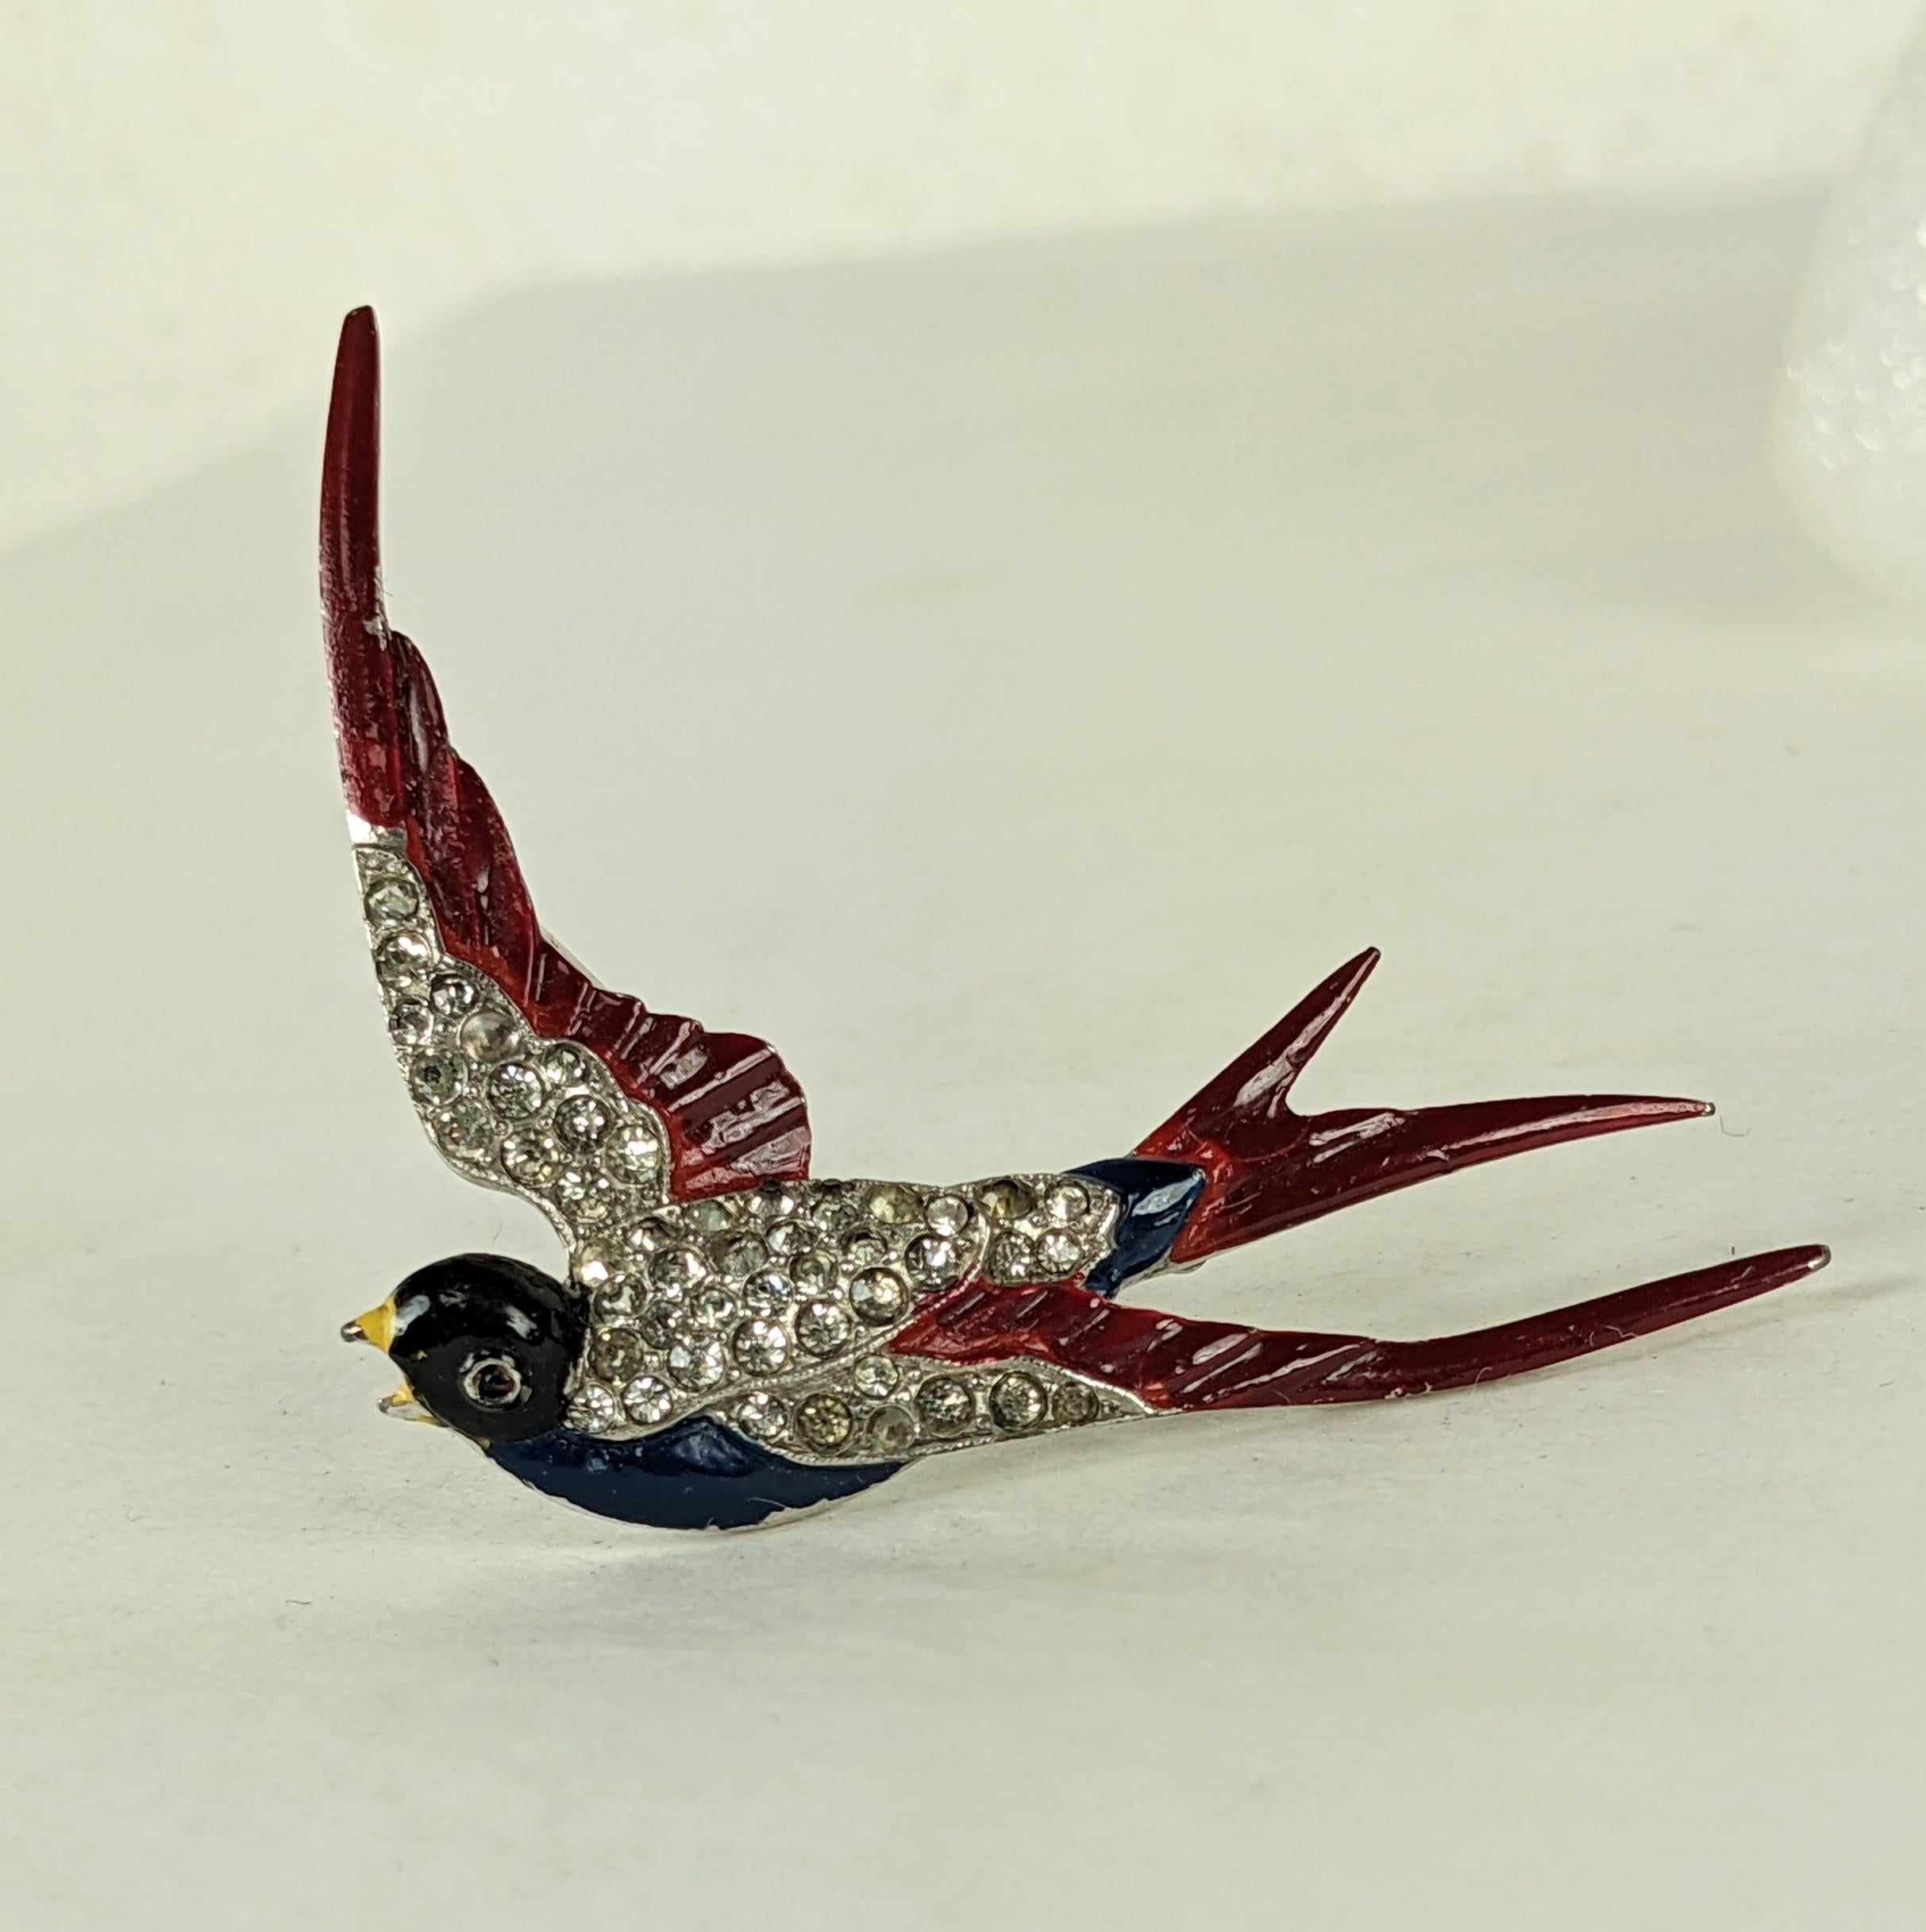 Charming Trifari Art Deco Enamel Sparrow, Alfred Phillipe from the 1930's. Original rare enamel with pave accents and cab eye, set in rhodium metal. 2.5